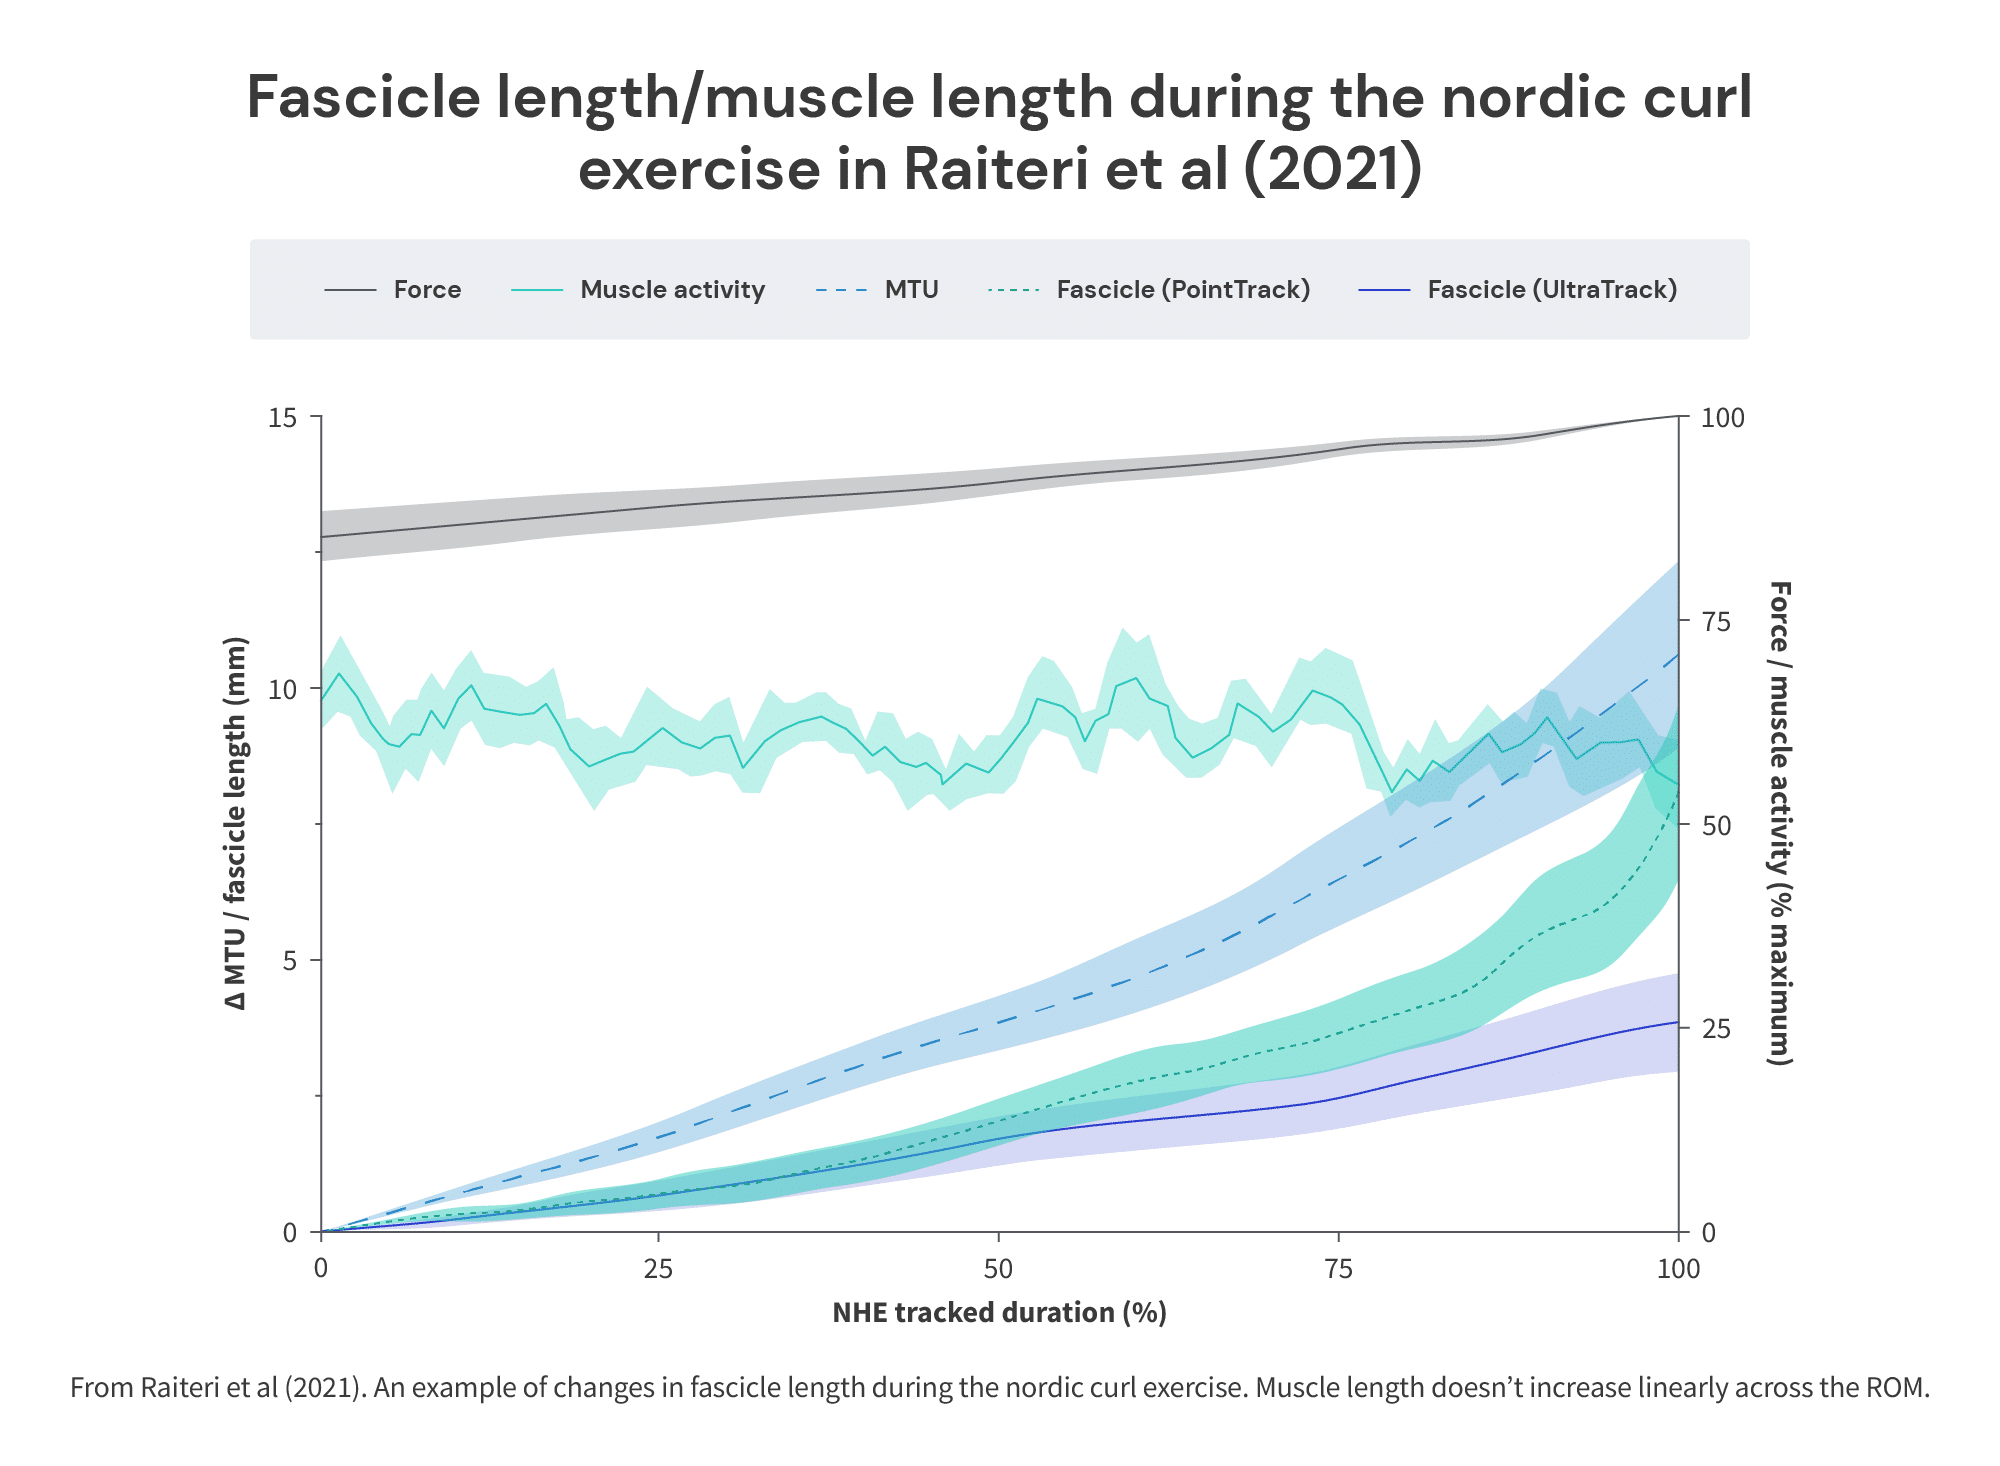 Fascicle length / muscle length during the Nordic curl exercise